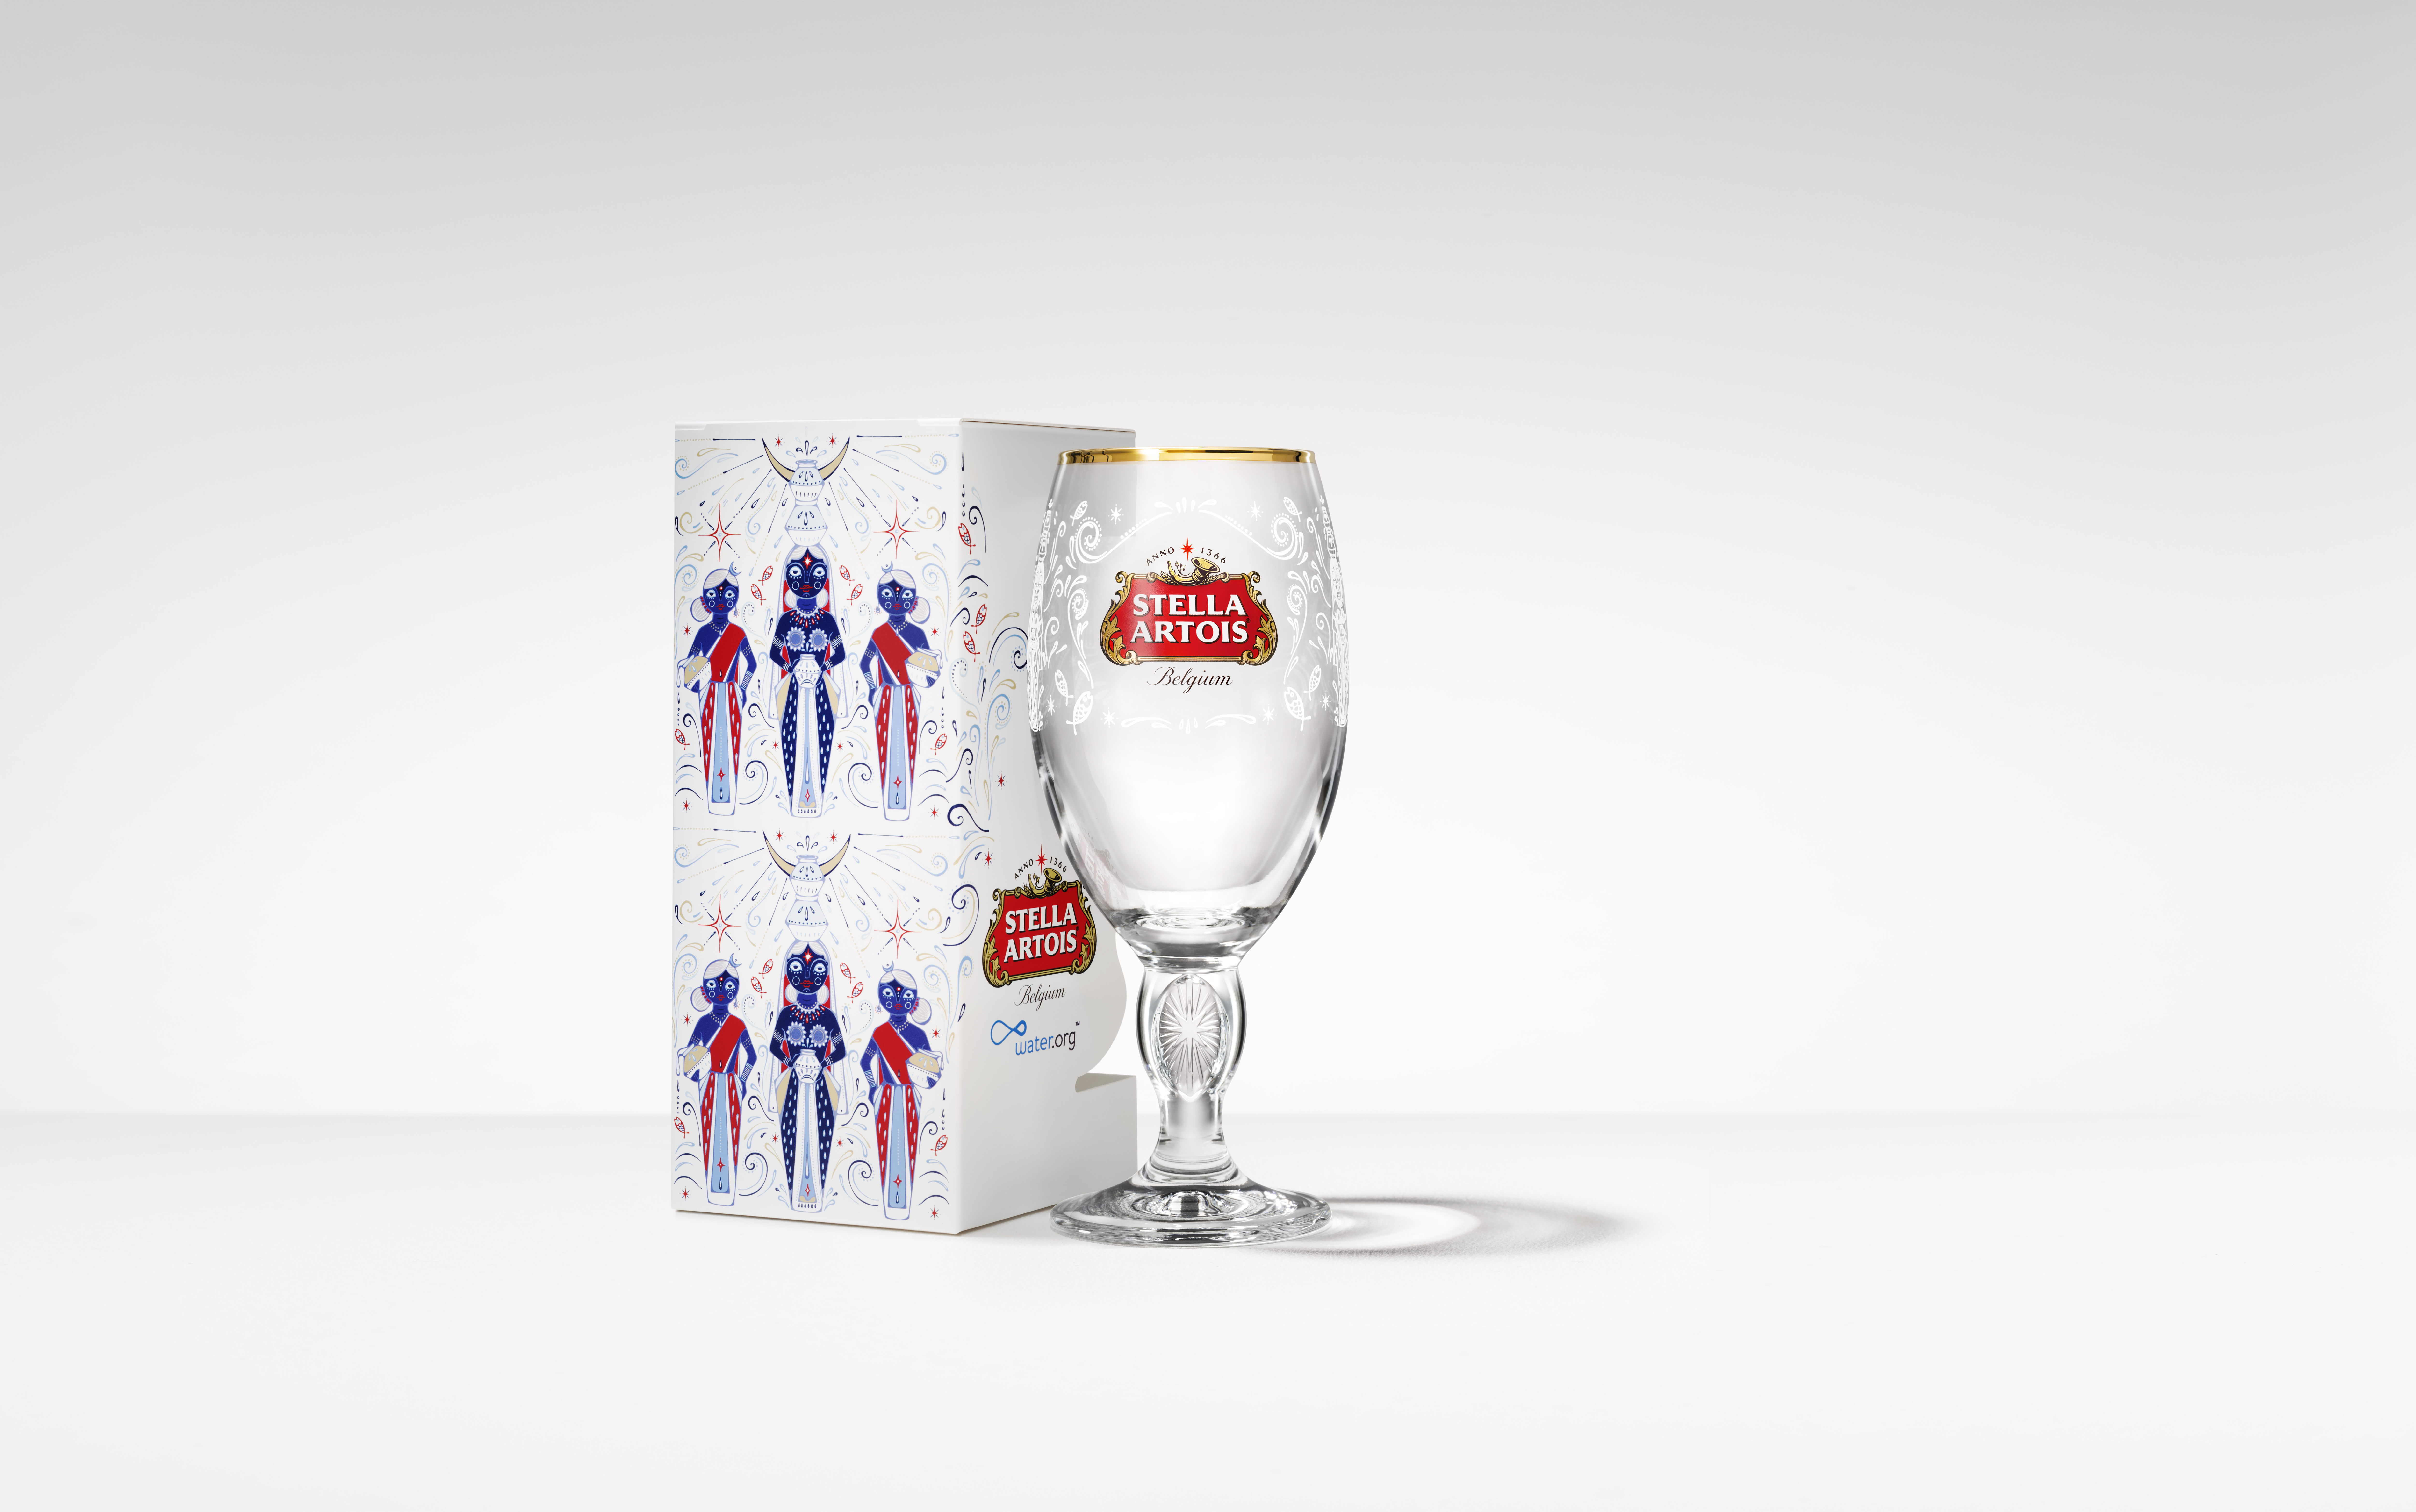 New Stella Artois Limited-Edition Chalice designed by Janine Shroff of India. The purchase of one Chalice helps Water.org provide five years of clean water to one person in the developing world.